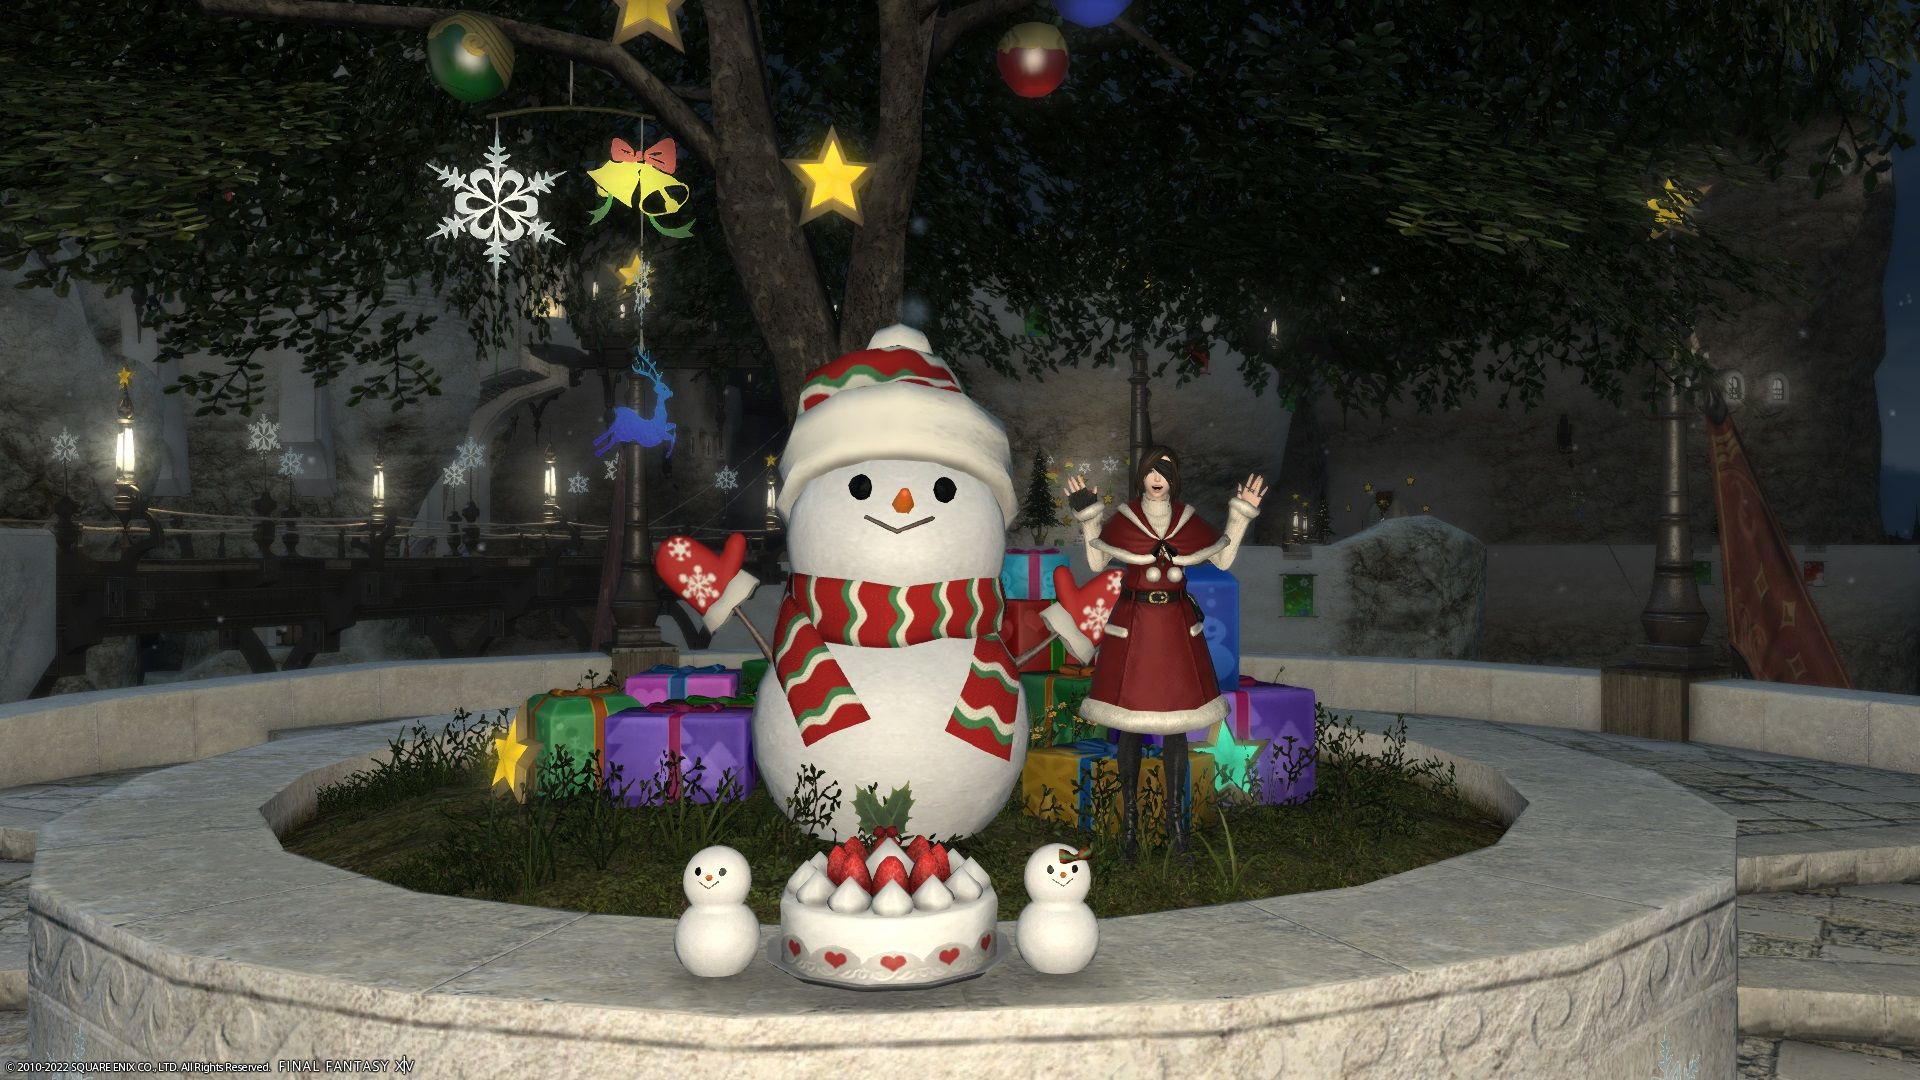 Final Fantasy 14 - player in festive gear beside a snowman and presents